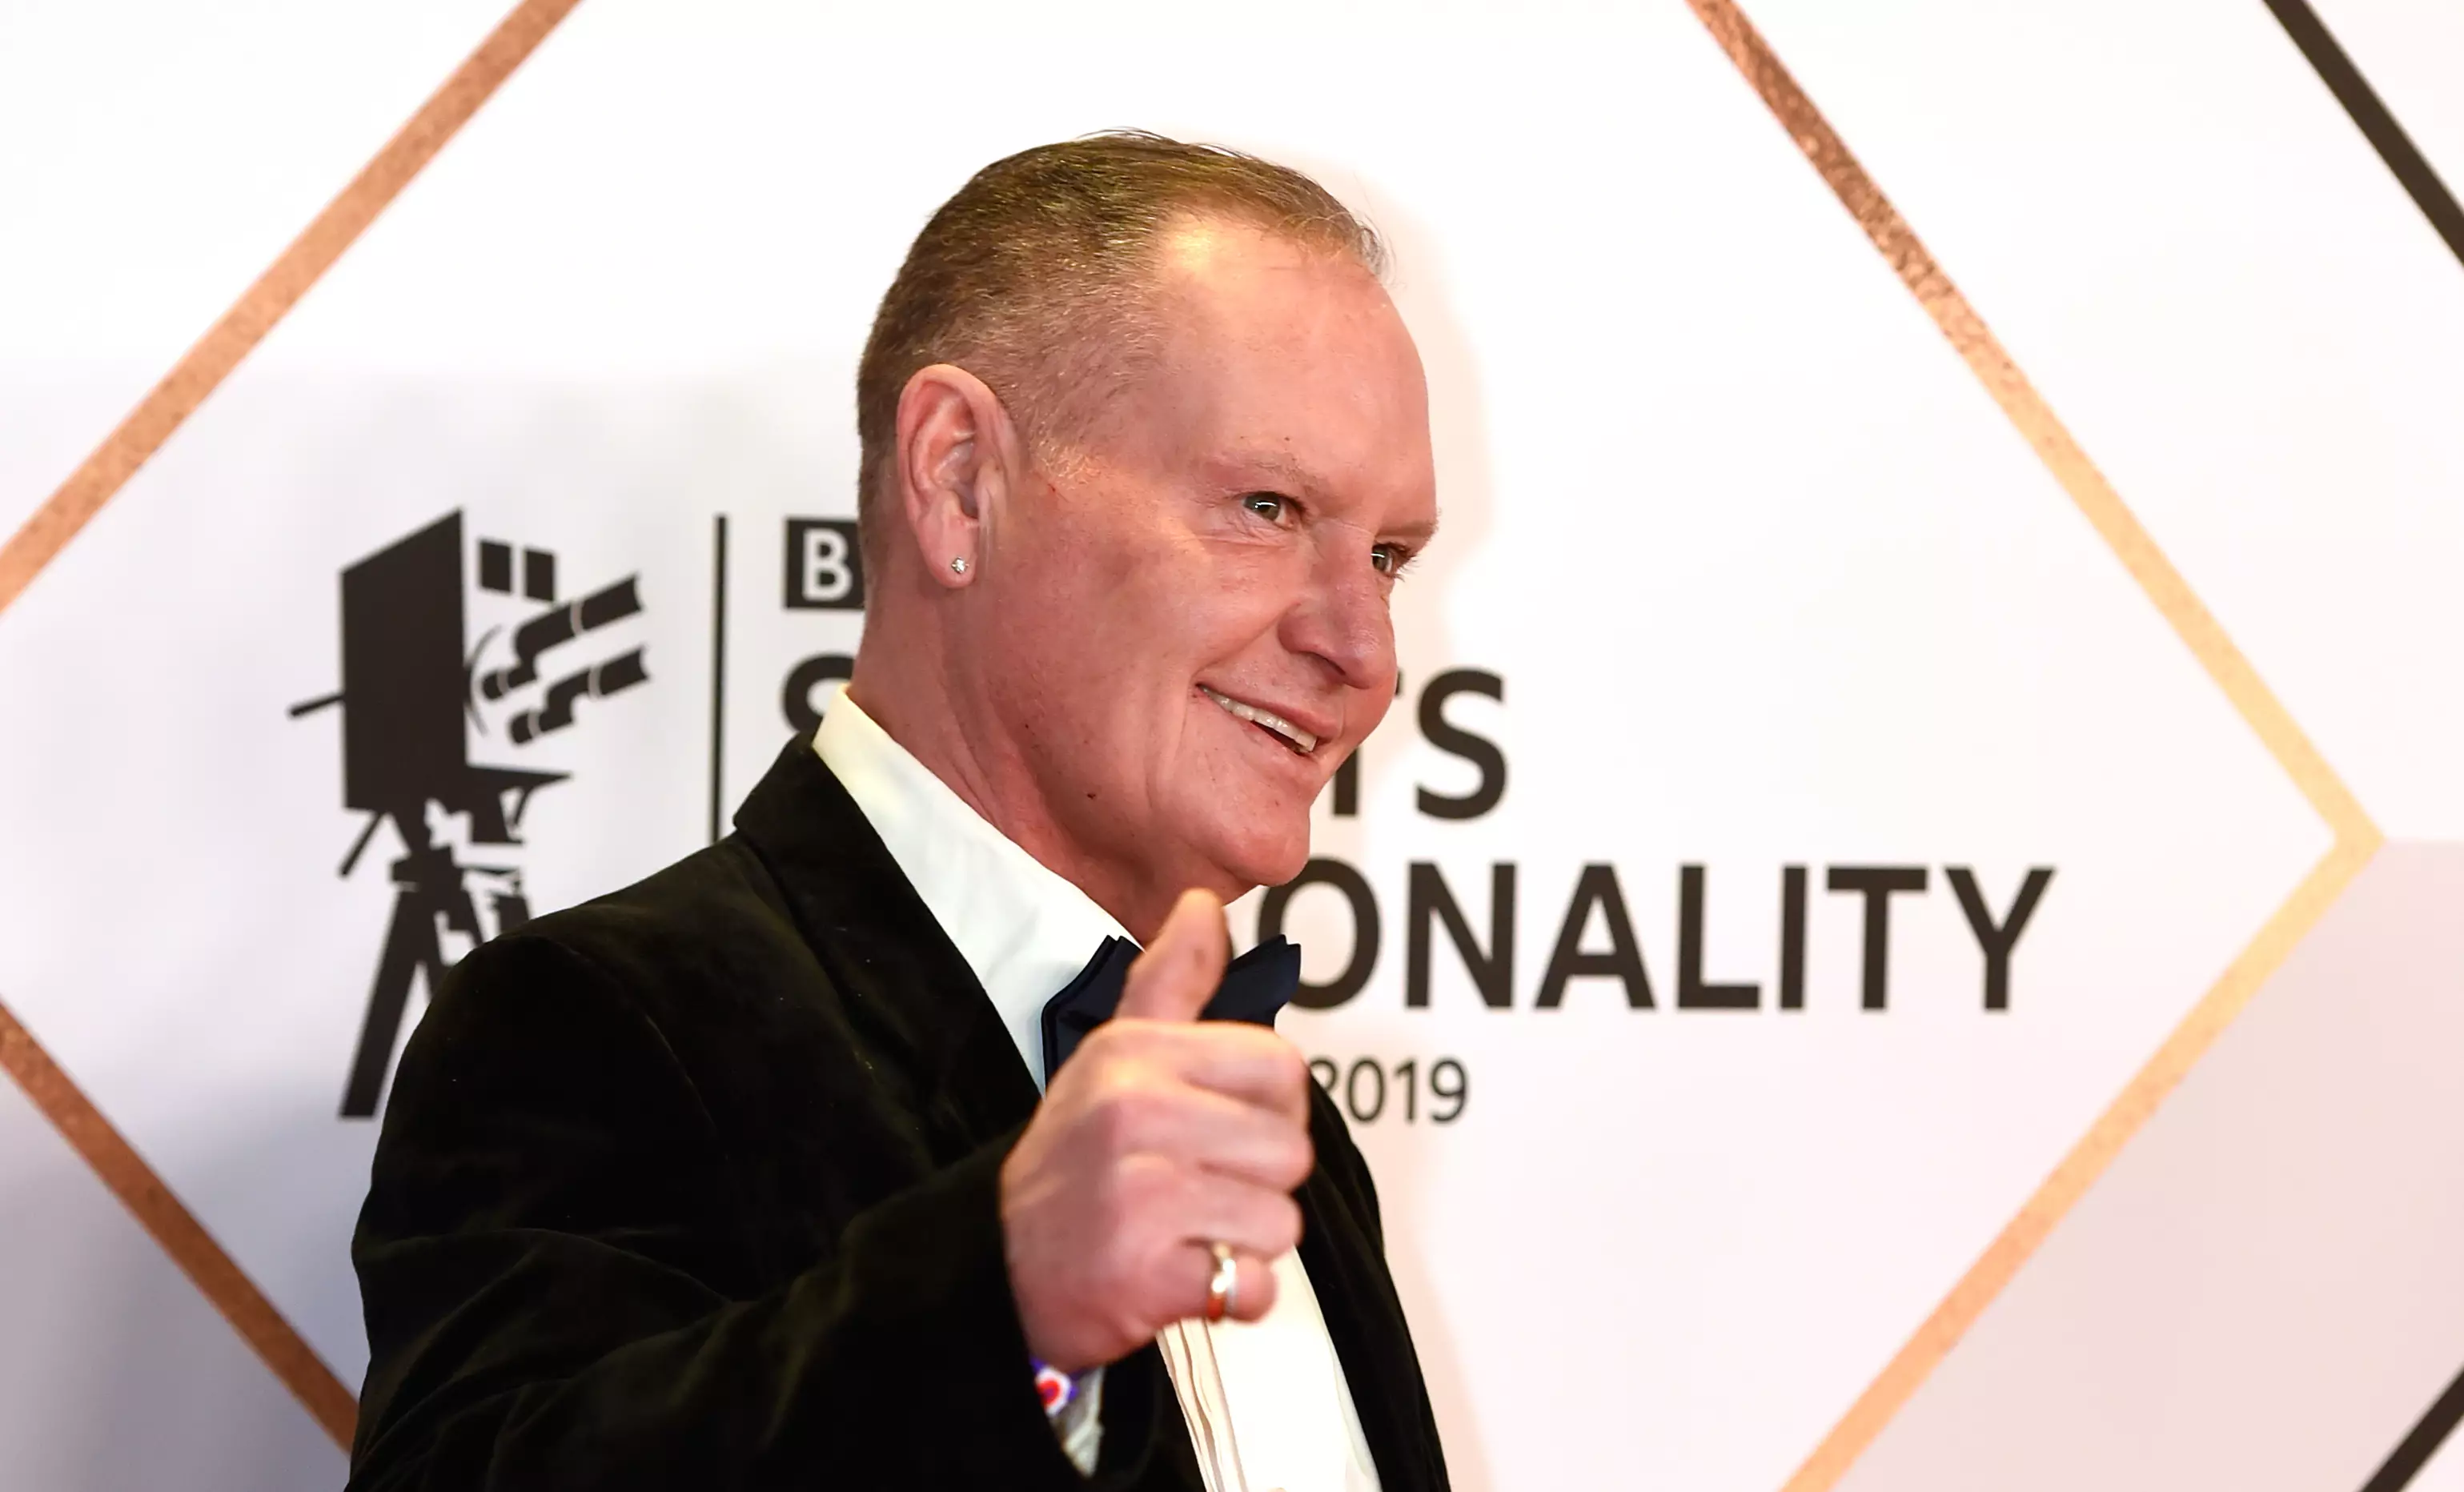 Paul Gascoigne at the BBC Sports Personality of the Year Awards 2021 (